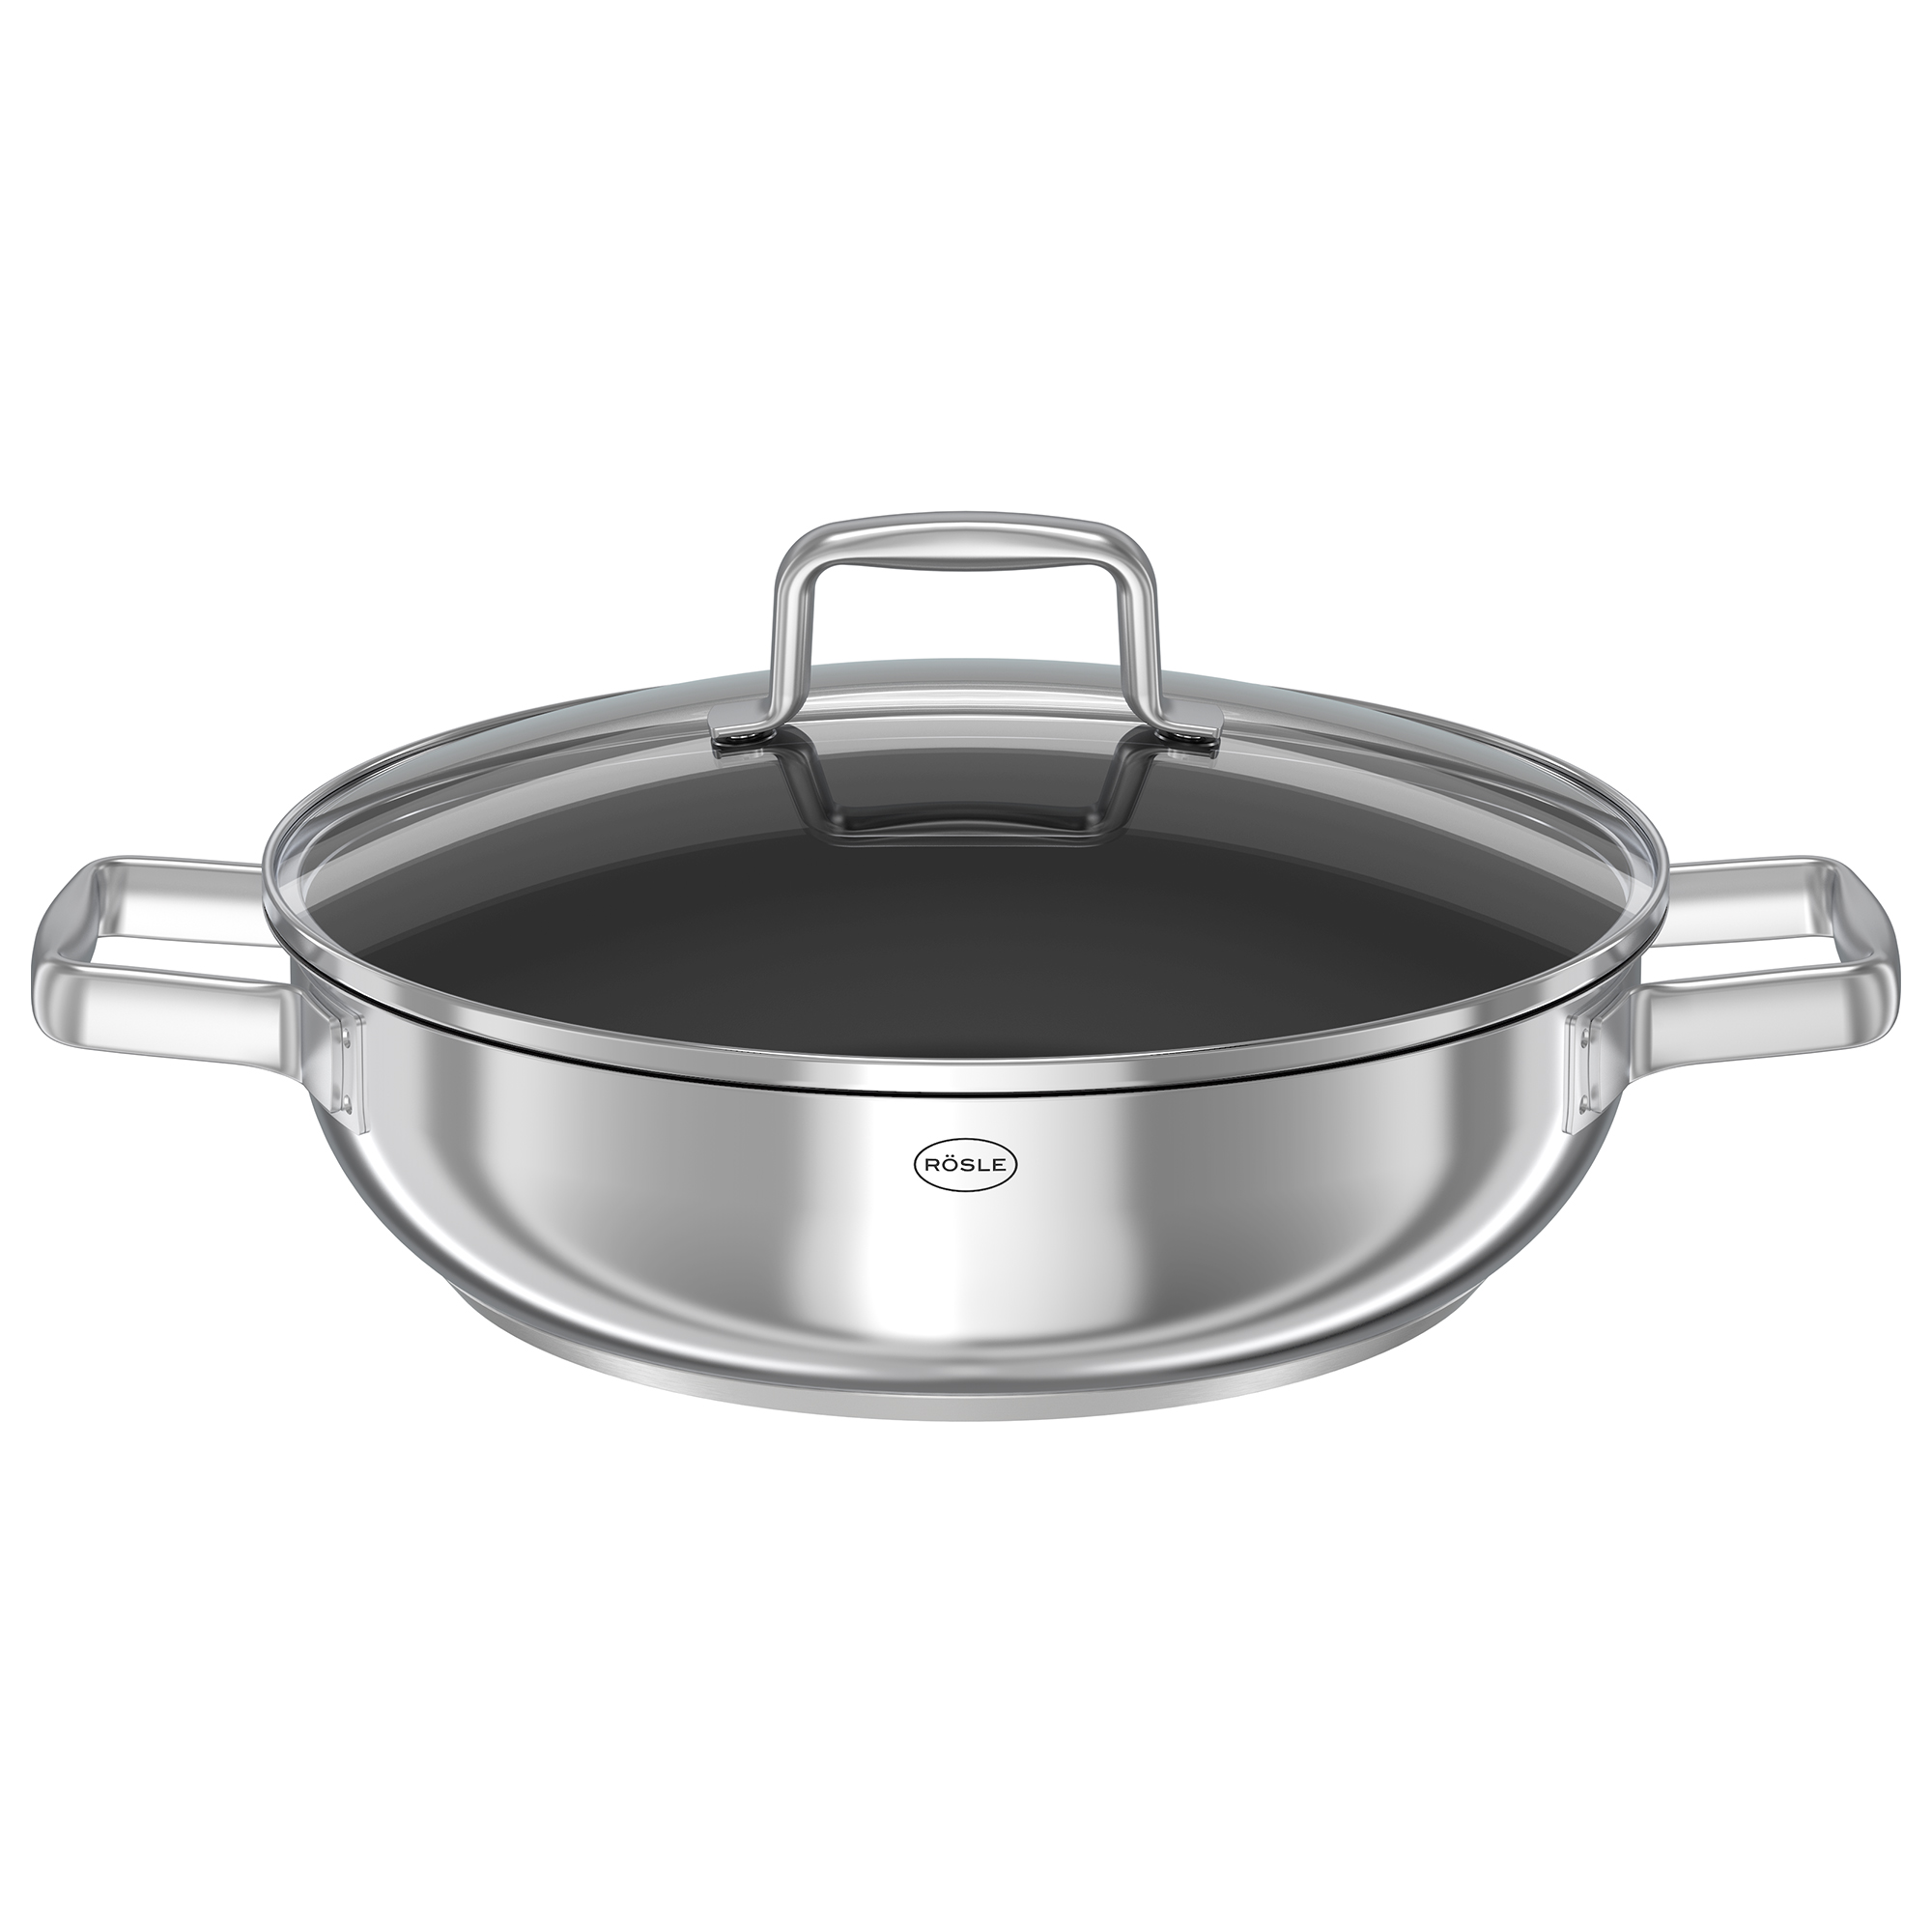 Serving Pan Moments with non-stick coating Ø 28 cm|11.0 in.